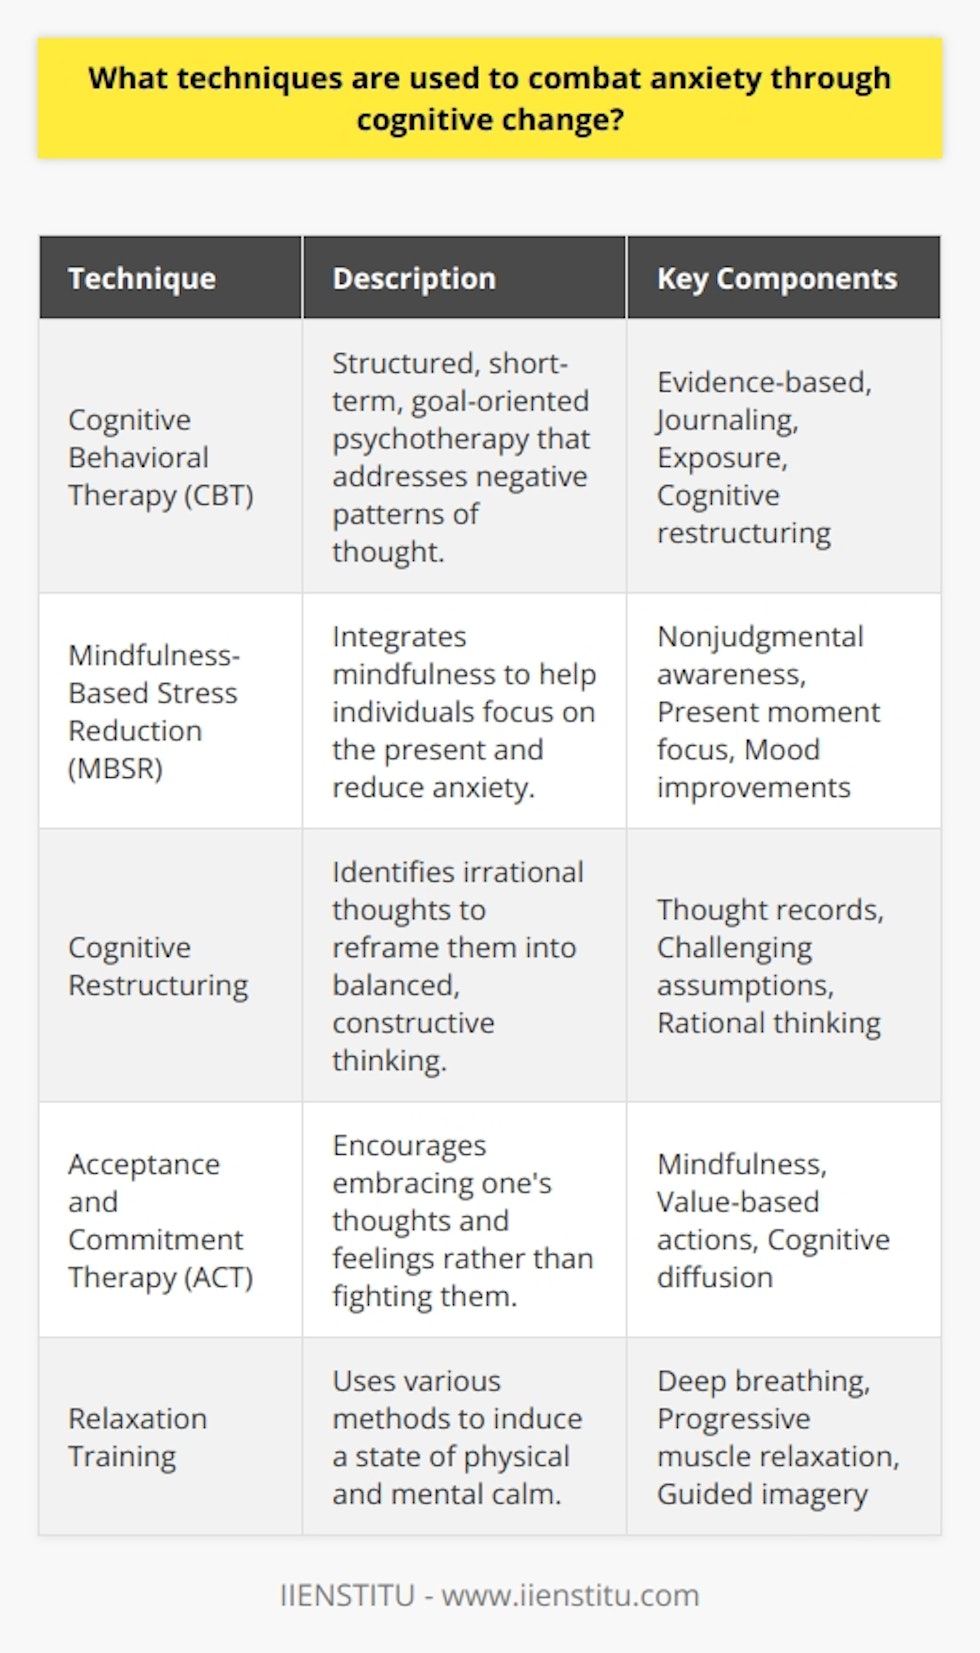 Anxiety, a multifaceted psychological condition, is known to affect many individuals across the globe. Cognitive change techniques offer a beacon of hope for those suffering from anxiety, by empowering them to alter the way their mind processes thoughts and emotions. The following are some cognitive change techniques that stand out for their efficacy and approach to managing anxiety:**Cognitive Behavioral Therapy (CBT):** Perhaps the most researched and widely endorsed technique in combatting anxiety through cognitive change is Cognitive Behavioral Therapy. CBT is an evidence-based practice that aims to transform negative thought patterns that contribute to an individual’s anxiety. By breaking down overwhelming problems into smaller parts, CBT helps individuals understand that their perceptions directly affect their emotional response. Ultimately, through tasks such as journaling, exposure to feared objects or scenarios, and cognitive restructuring, patients learn to develop healthier thinking patterns.**Mindfulness-Based Stress Reduction (MBSR):** Although mindfulness practices date back centuries, their incorporation into Western therapeutic modalities has provided a novel approach to anxiety treatment. MBSR encourages individuals to fully engage with the present moment and cultivate an attitude of nonjudgment towards their experiences. This acceptance can disrupt the cycle of anxiety by preventing the escalation of negative thoughts. Research has shown MBSR to be effective in reducing symptoms of anxiety, alongside improvements in mood and quality of life.**Cognitive Restructuring:** This technique involves identifying and challenging irrational or maladaptive thoughts that fuel anxiety. Through cognitive restructuring, individuals learn to question the validity of their anxious thoughts (e.g., the tendency to assume the worst-case scenario) and substitute them with more balanced and rational alternatives. Practitioners of this technique often use thought records to trace the origin of anxiety-inducing thoughts and reshape them into constructive narratives.**Acceptance and Commitment Therapy (ACT):** ACT is a branch of cognitive-behavioral therapy that incorporates mindfulness strategies. It is predicated on the notion of accepting one's experience and committing to personal values as a countermeasure to anxiety. Through ACT, individuals learn to observe their thoughts without trying to alter them, which can reduce the struggle often associated with anxiety. By focusing on committed actions aligned with personal values, ACT helps individuals to move forward in their lives despite experiencing anxiety.**Relaxation Training:** Finally, relaxation training methods are integral adjuncts to cognitive change techniques. By practicing deep breathing exercises, progressive muscle relaxation, or guided imagery, individuals can reduce physical symptoms of anxiety. This physiological calming can create a constructive environment for cognitive techniques to take effect.Combined, these techniques offer a comprehensive approach to managing anxiety by not only focusing on thoughts and behaviors but also balancing one’s physiological response to stress. It is worth noting that personalized treatment plans, guided by licensed mental health professionals like those from IIENSTITU, can significantly enhance the effectiveness of these techniques. By focusing on cognitive change, individuals with anxiety can gain mastery over their thought processes, thereby reducing the hold that anxiety has on their life.